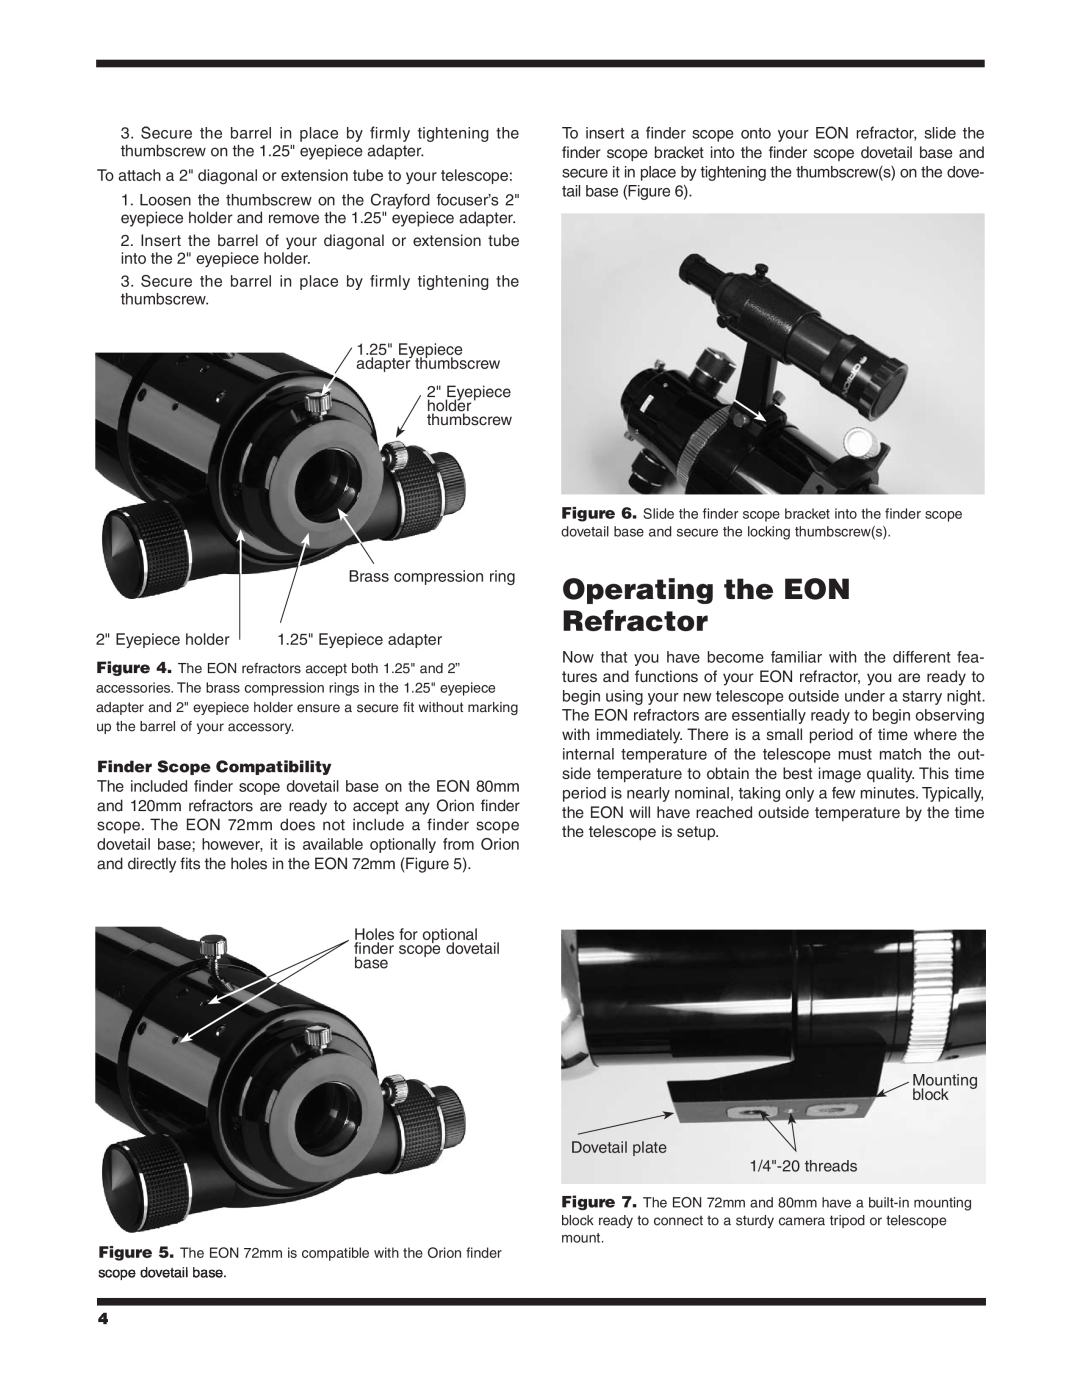 Orion 9927, 9781, 9925 instruction manual Operating the EON Refractor, Finder Scope Compatibility 